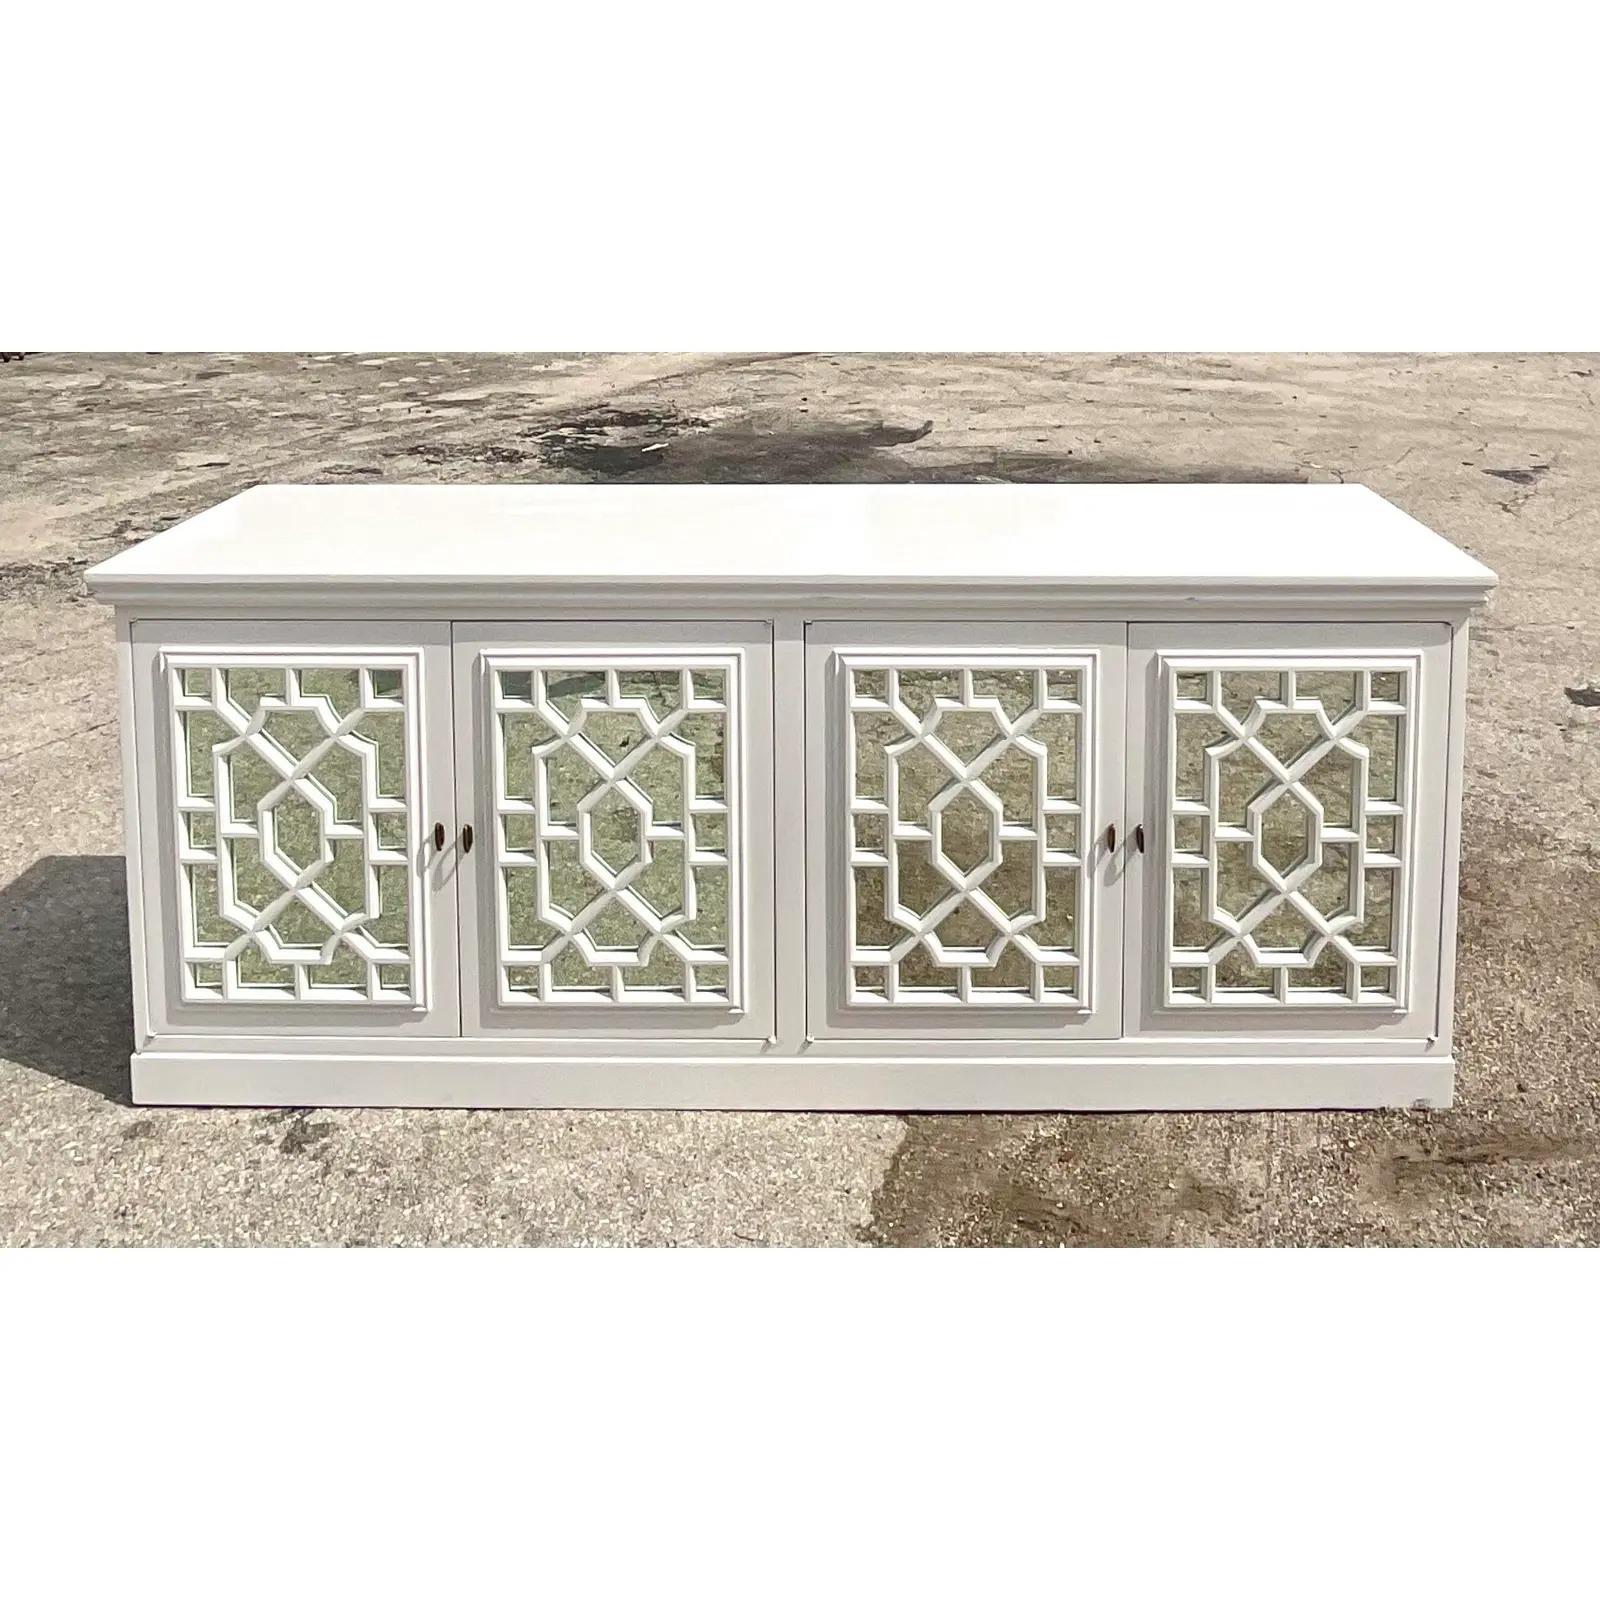 Fantastic vintage Regency white lacquer credenza. Beautiful fretwork mill work offered mirrored doors. Lots of great storage below. Acquired from a Palm Beach estate.